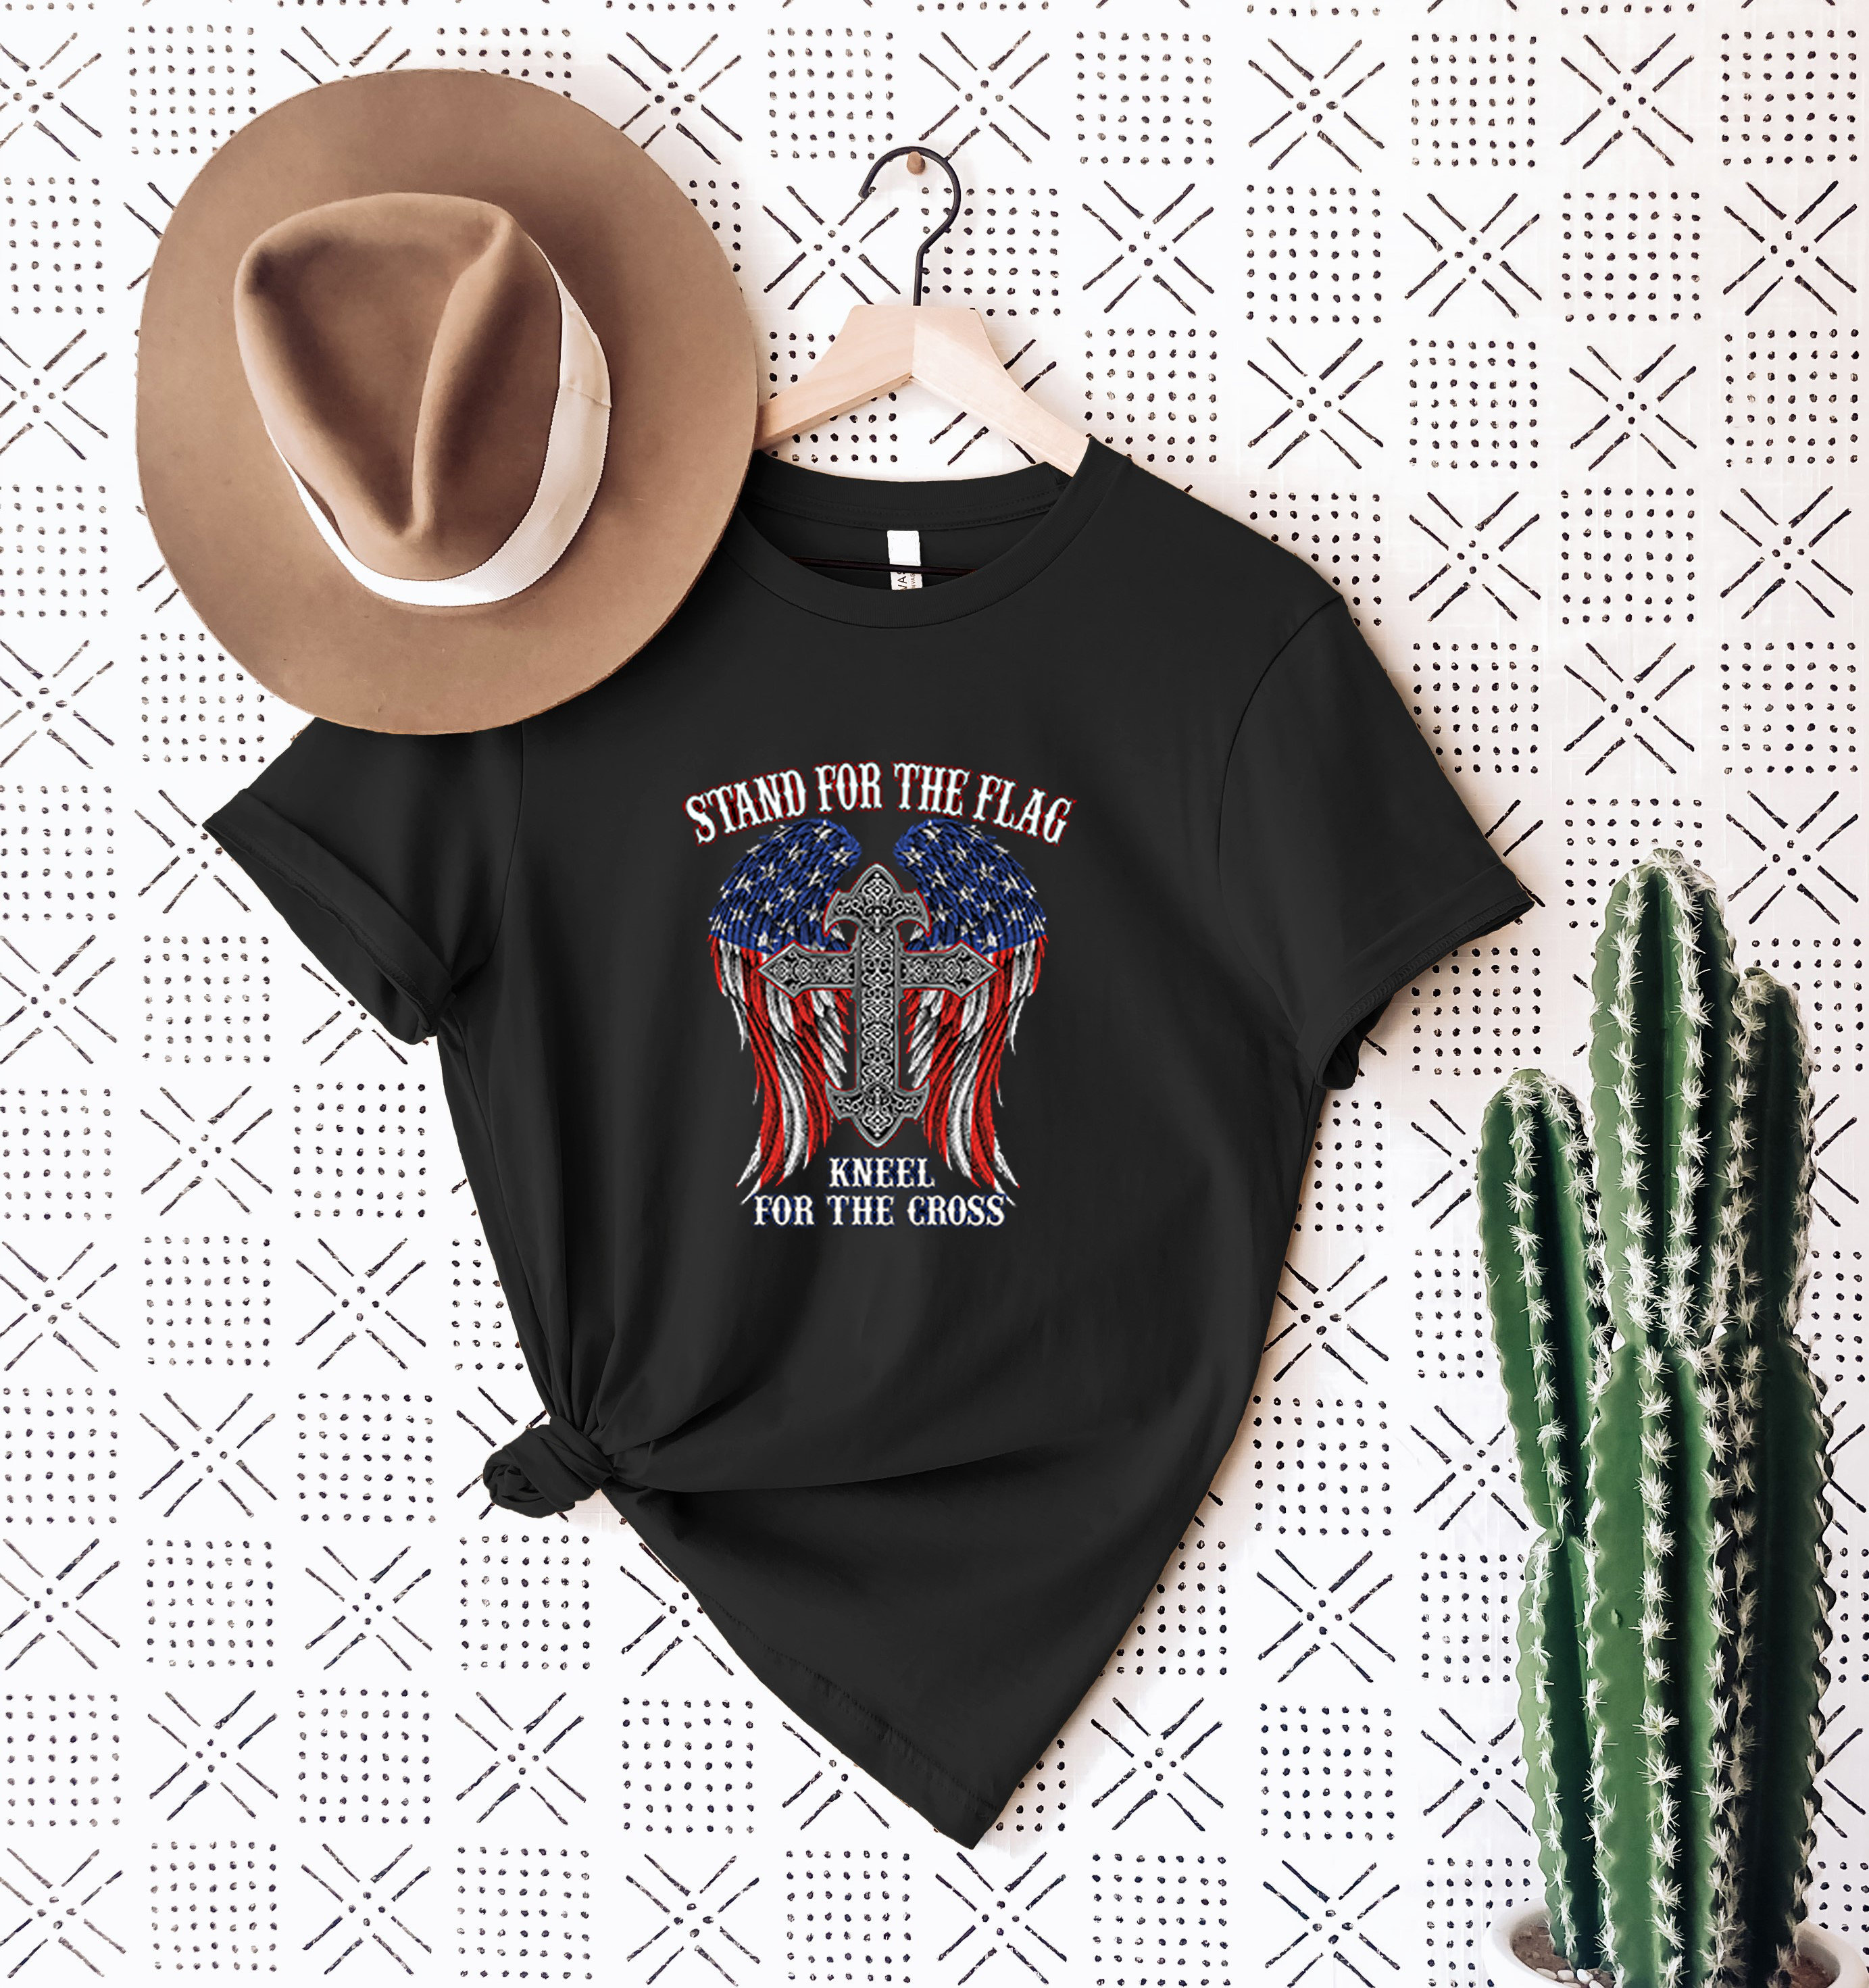 Stand for the Flag Kneel for the Cross Shirtpatriot | Etsy